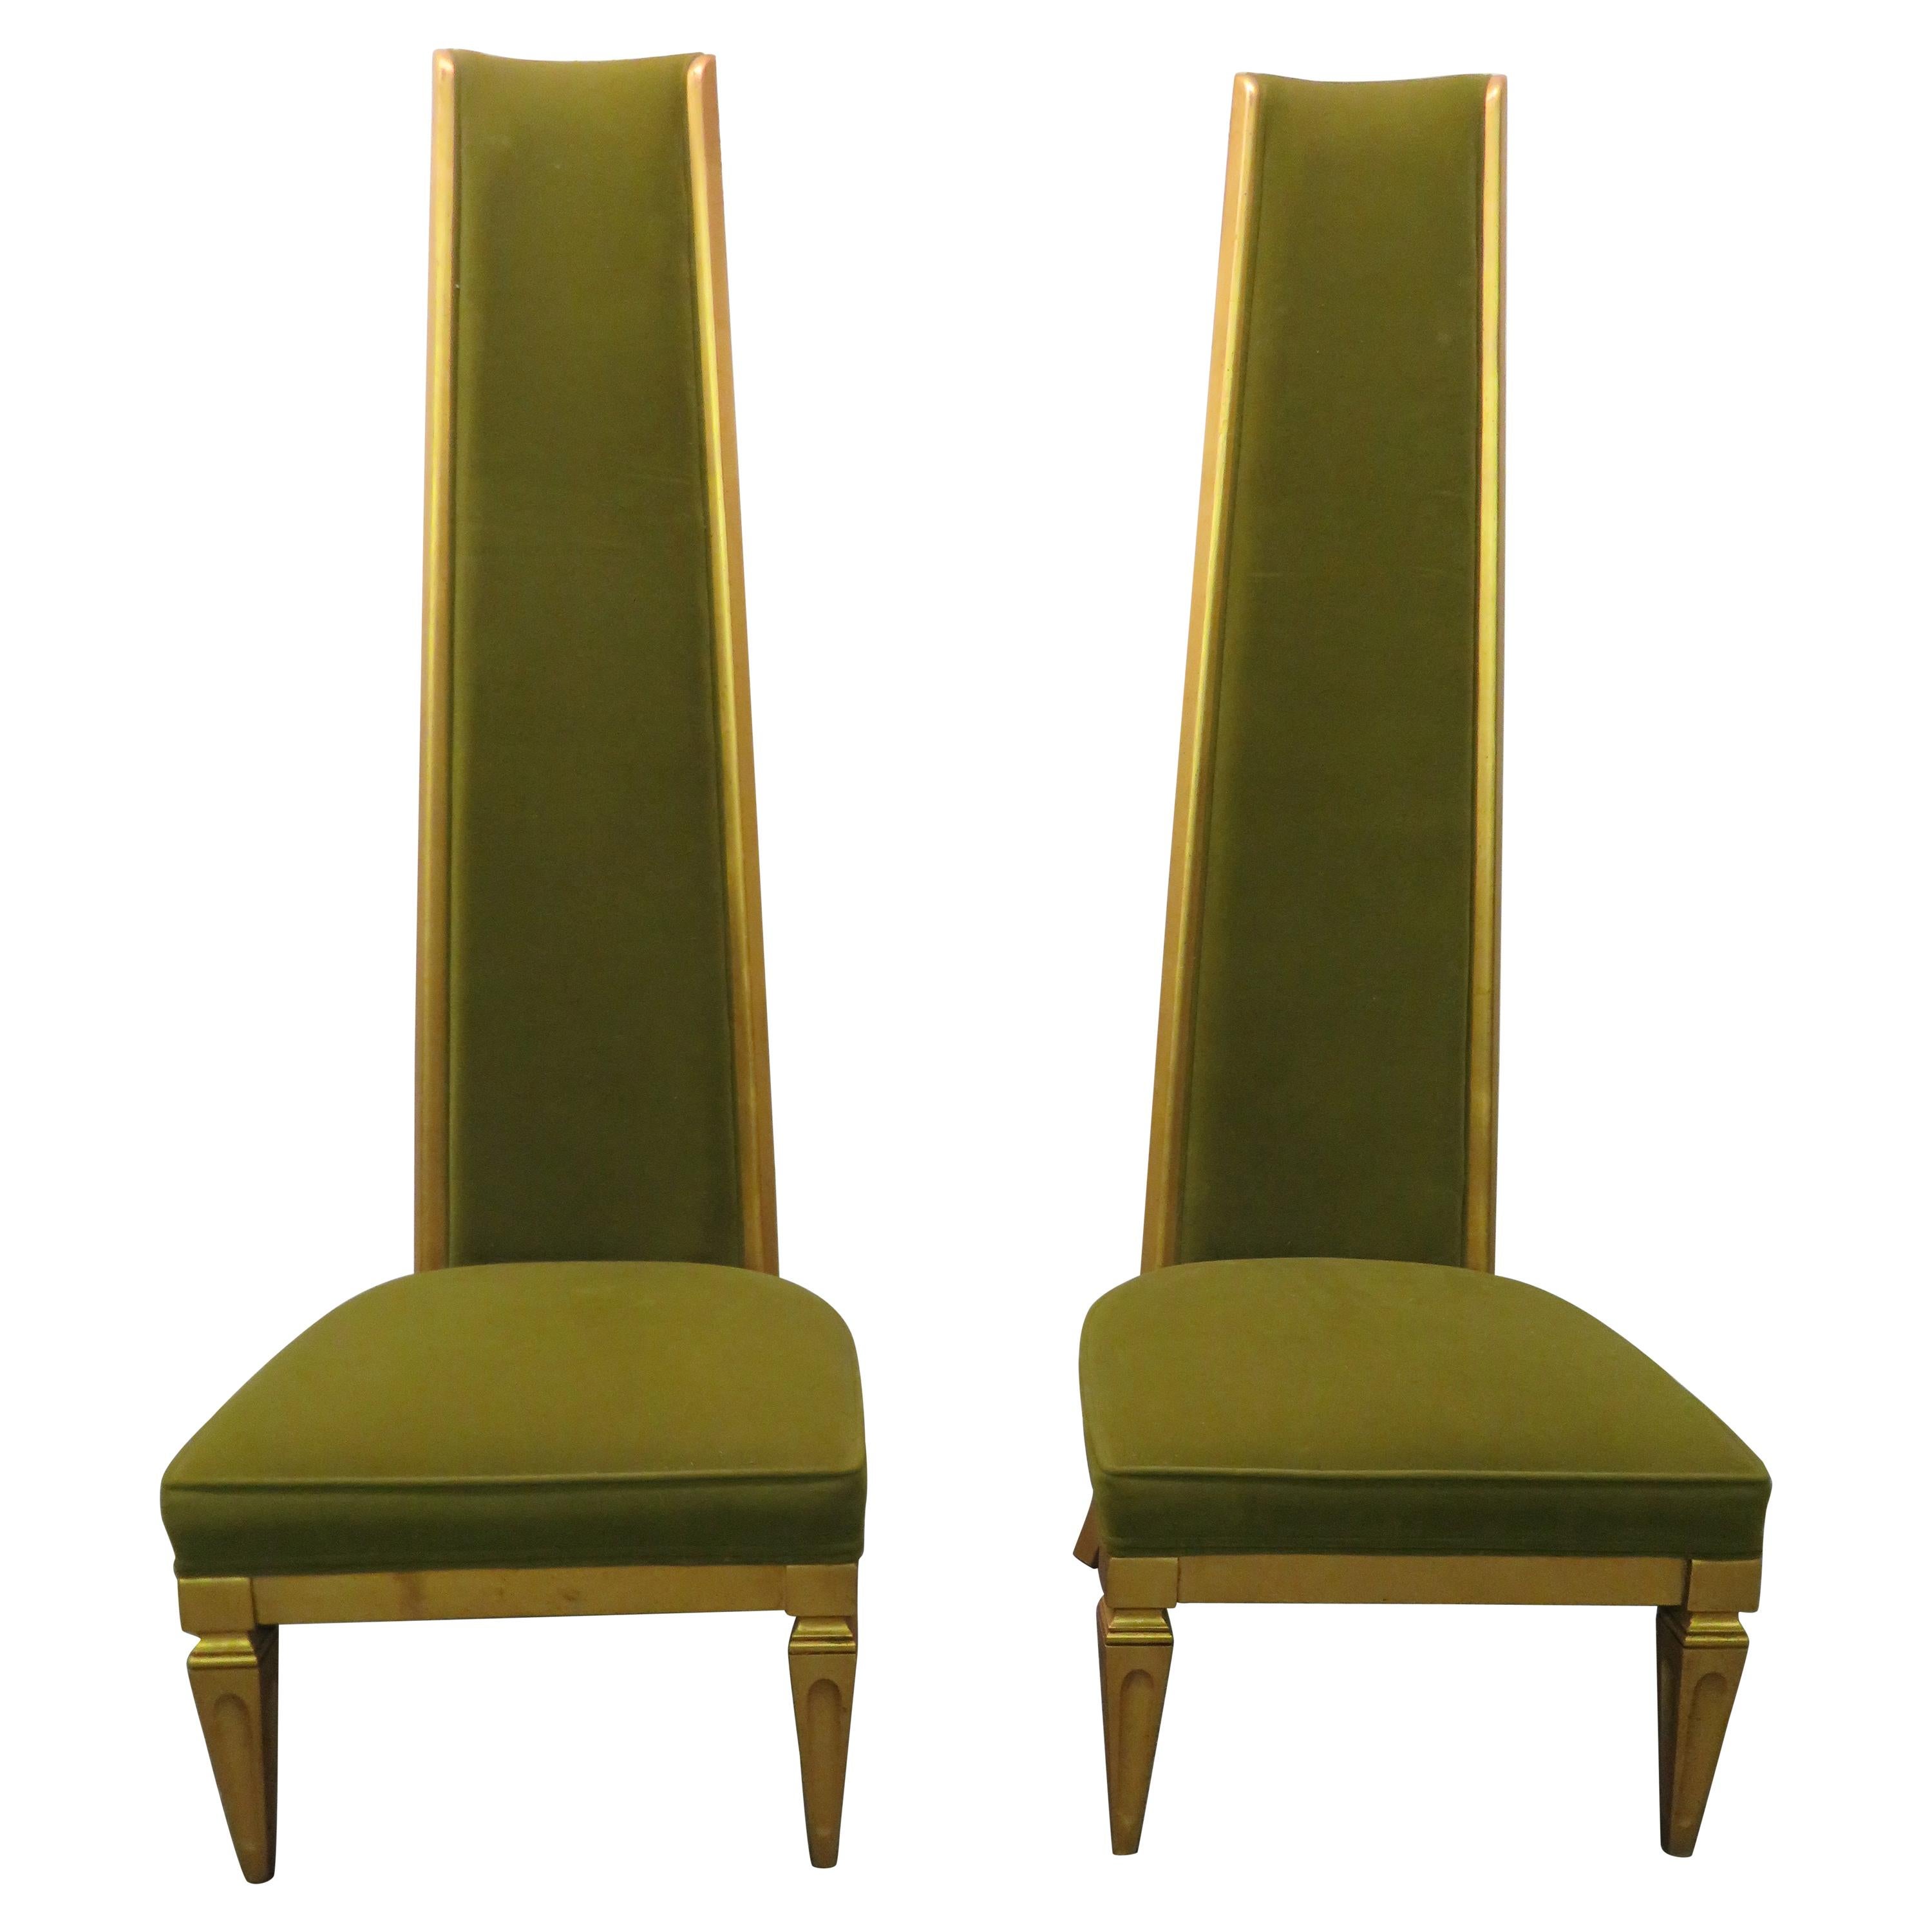 Wonderful Pair of Super Tall Back Slipper Lounge Chairs Hollywood Regency